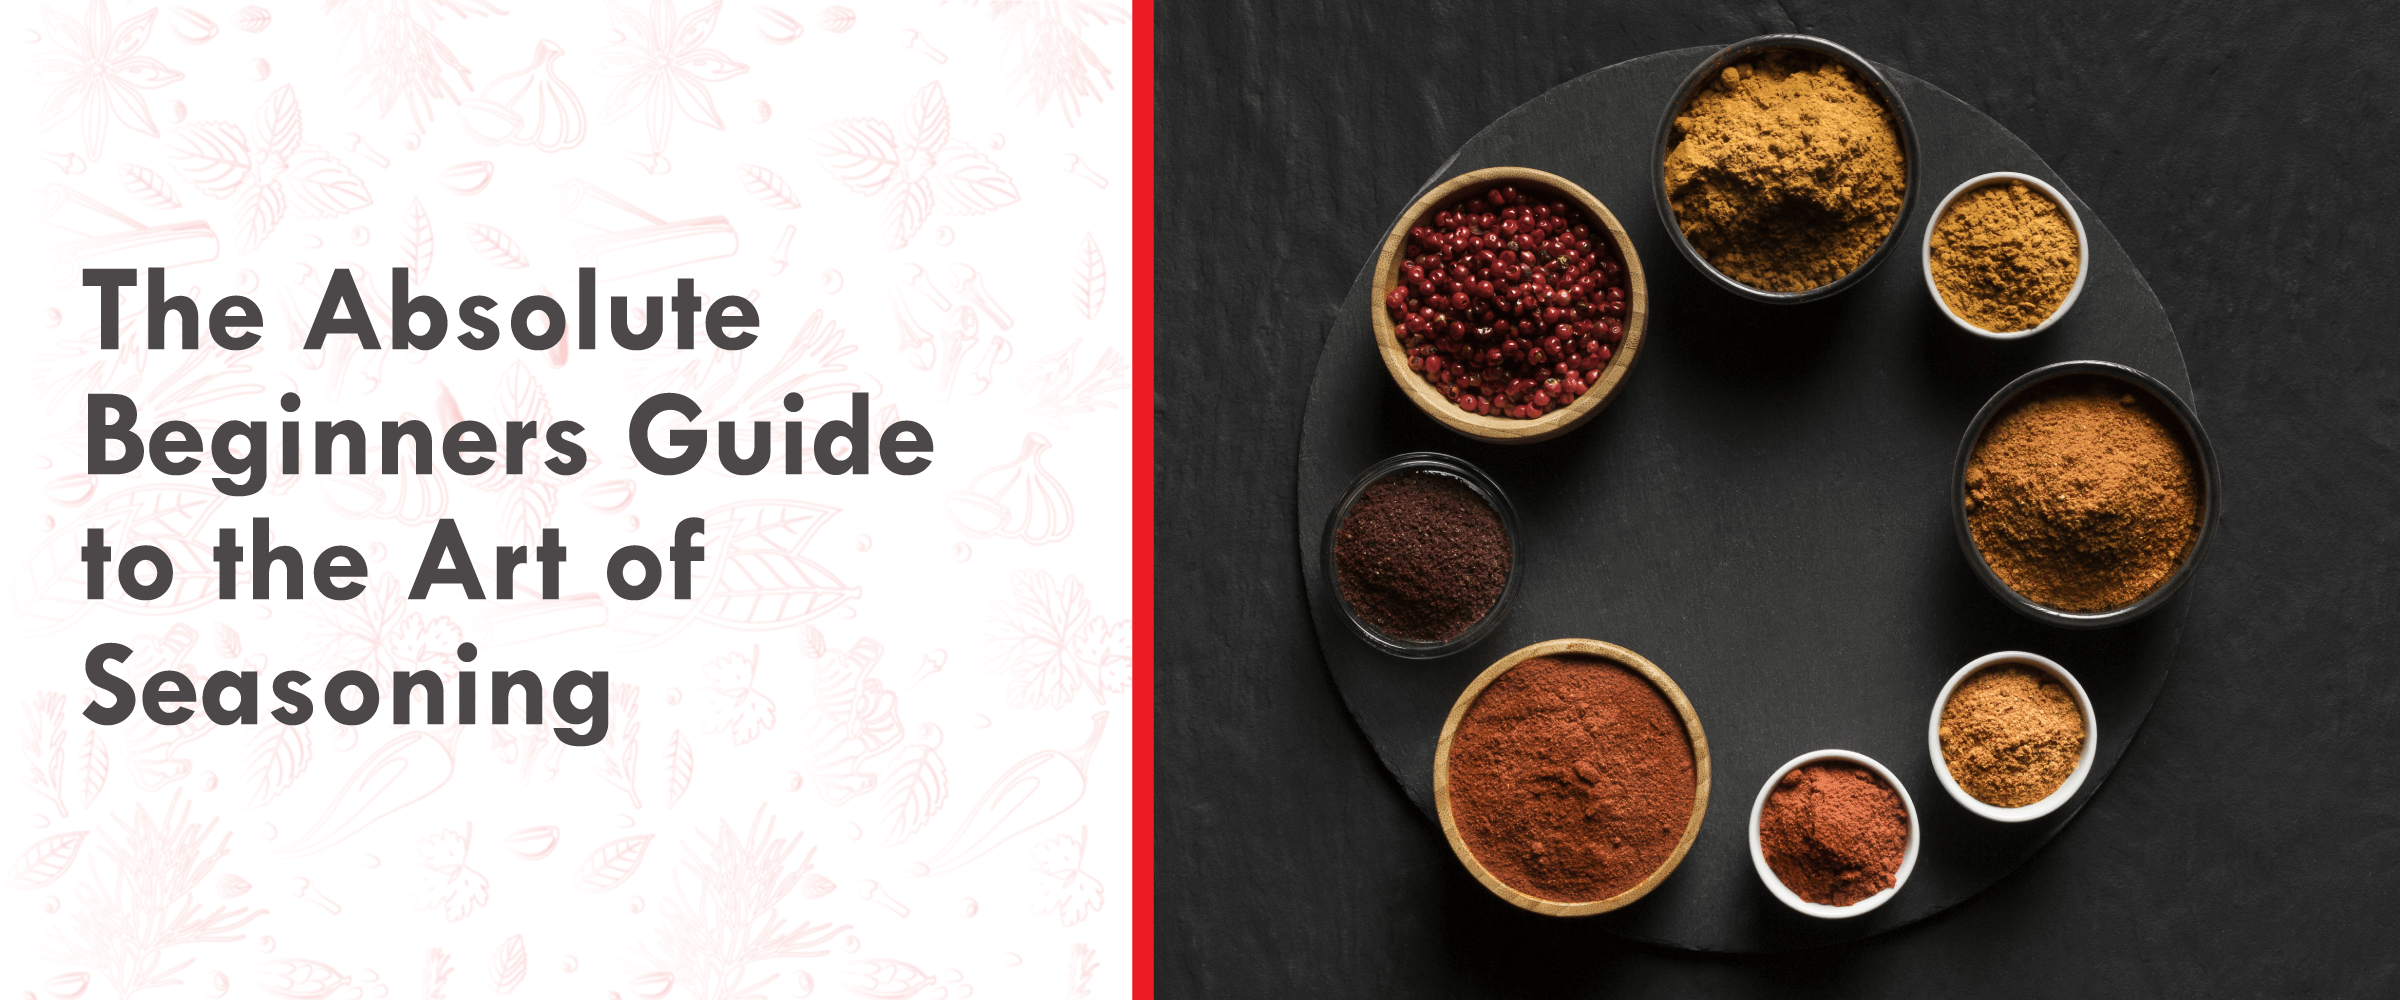 The absolute beginners guide to the art of seasoning